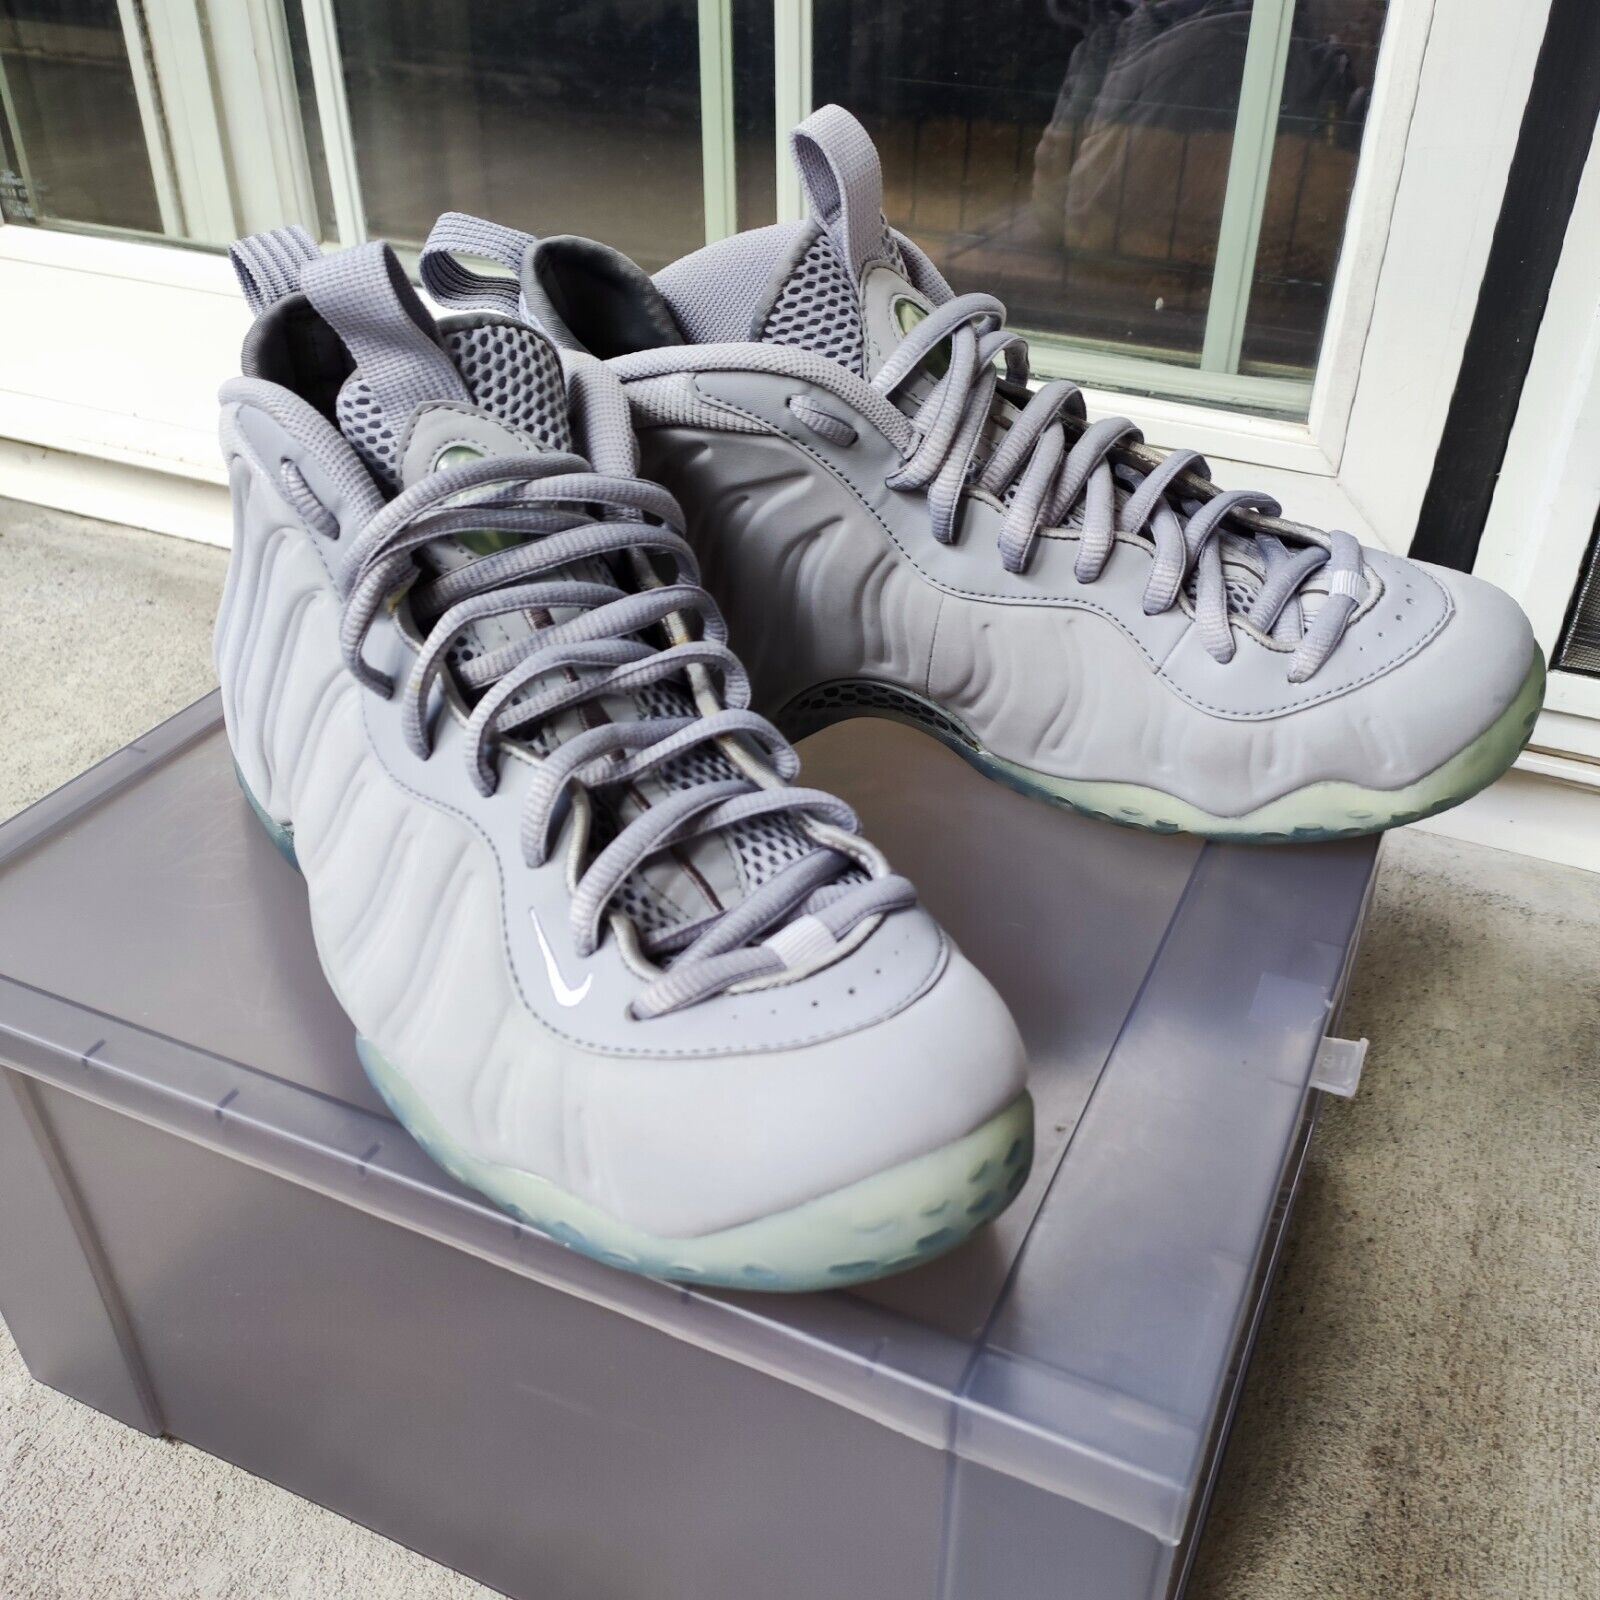 Nike Air Foamposite One PRM 'Wolf Grey' pre-owned Sz 11